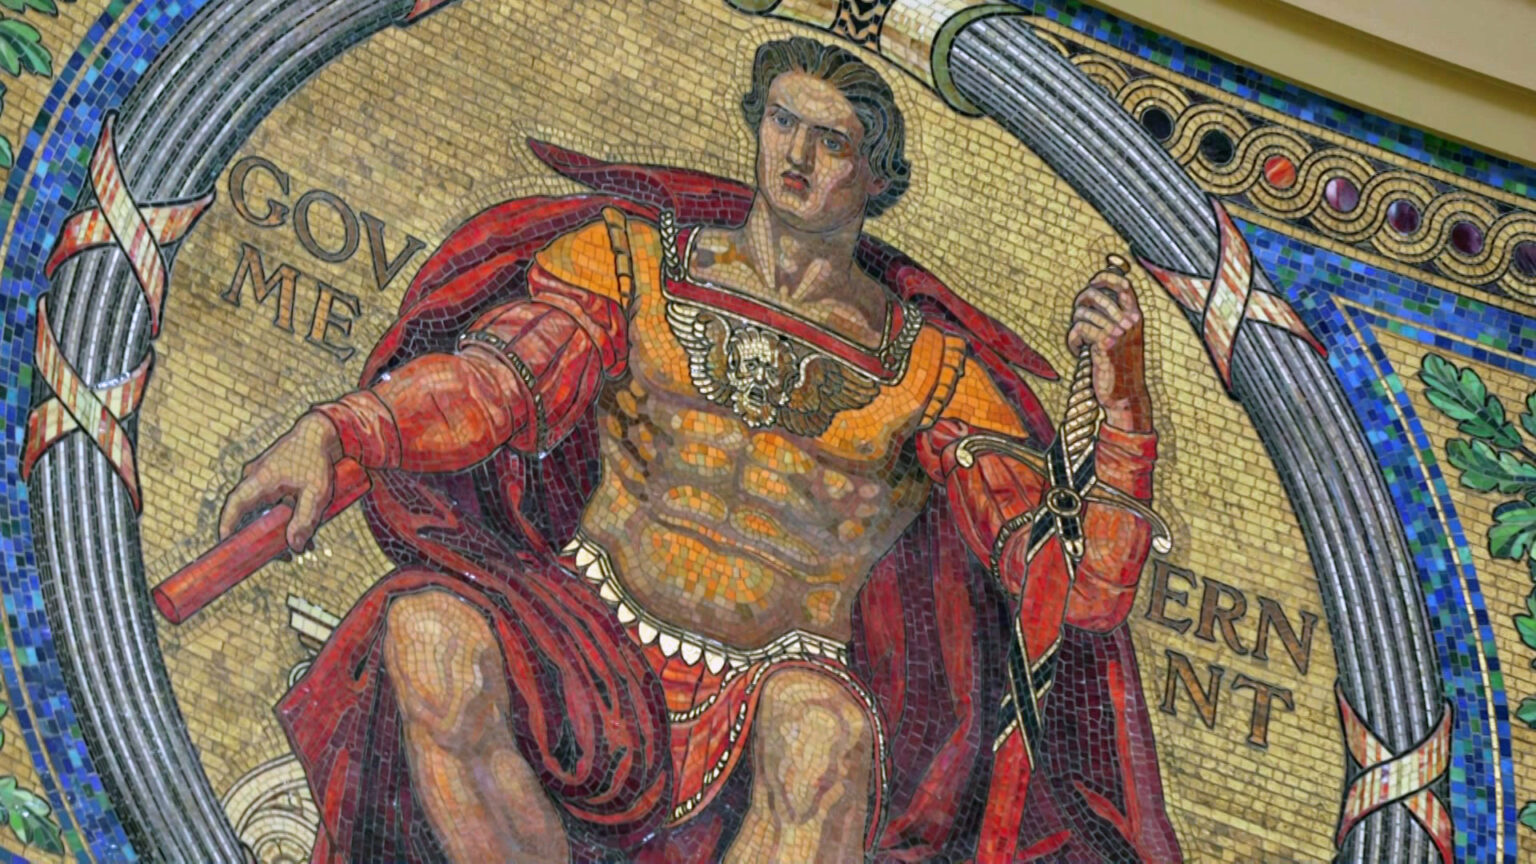 A mosaic depicting a Classical figure holding a sword and scroll and labeled Government is seen on a curved interior wall of a rotunda inside a building.